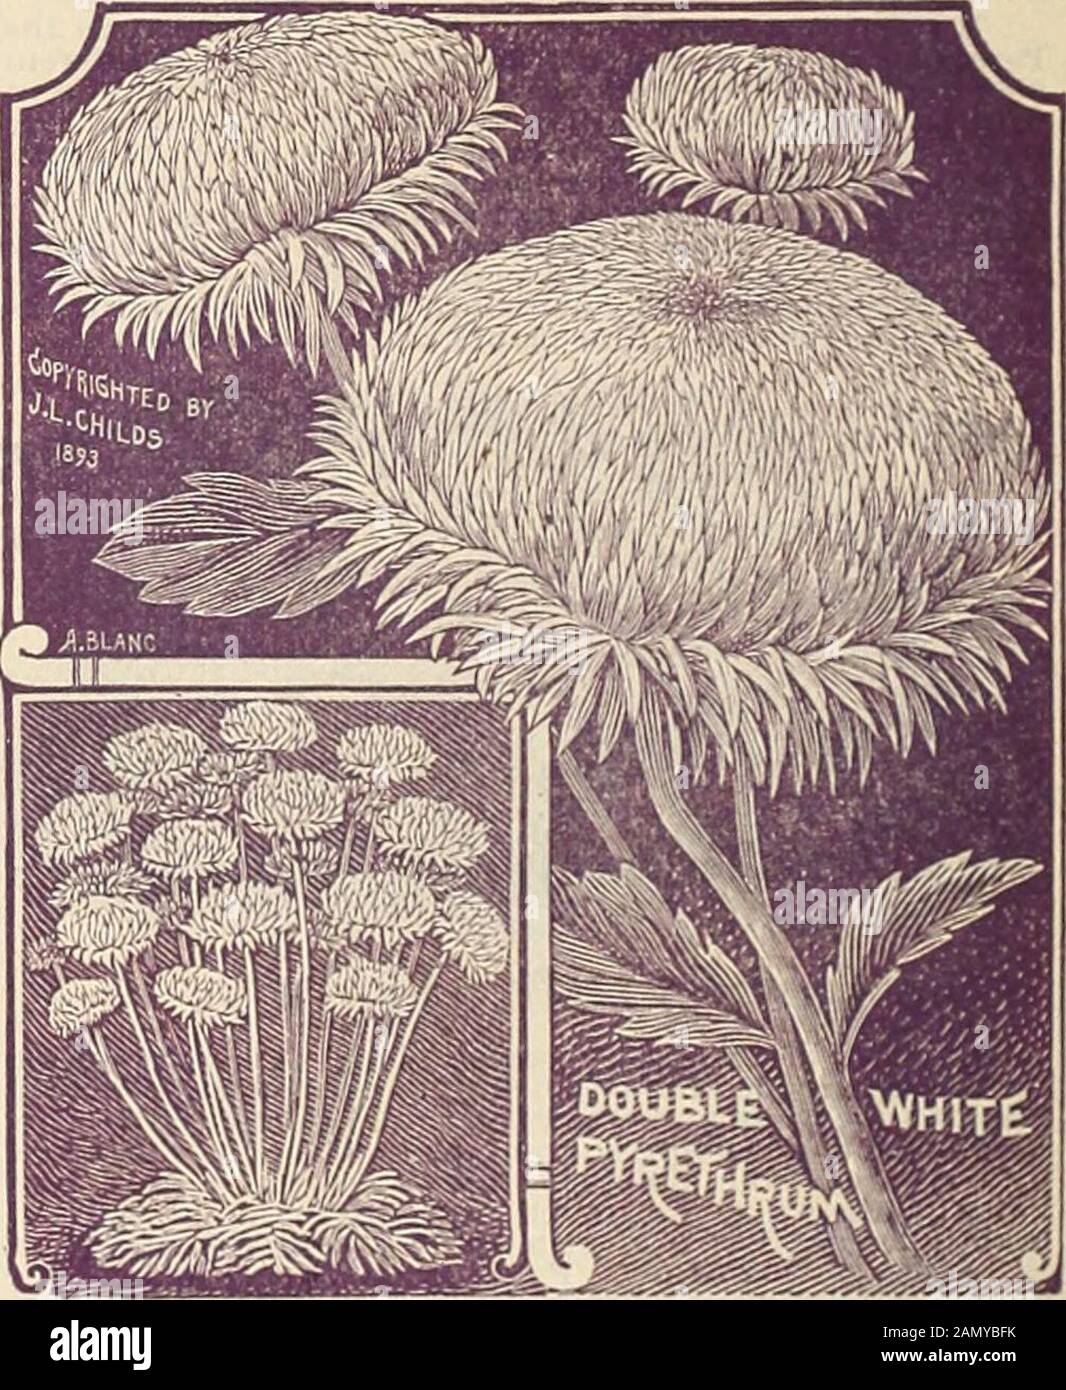 Childs' rare flowers, vegetables & fruits for 1895 . formingcompact tufts of narrow green foliage, which makes itparticularly valuable for edging. The flowers are a clearbright pink, and borne in clu.sters on tall stems. Itbloom.s all summer long, and is a very pretty, desirableand useful flowi^r, really the best of all hardy plants foredging walks, beds, etc. Splrea Palmata. (Irows two feet high, with liirge, featheryplumes of t he most charming rosy sc4irlet blossoms. Splrea Elegans. Iure white, in large, compact .spirals. Splrea Aurea Reticulata. Fine yellow, variegated foliageand elegant f Stock Photo